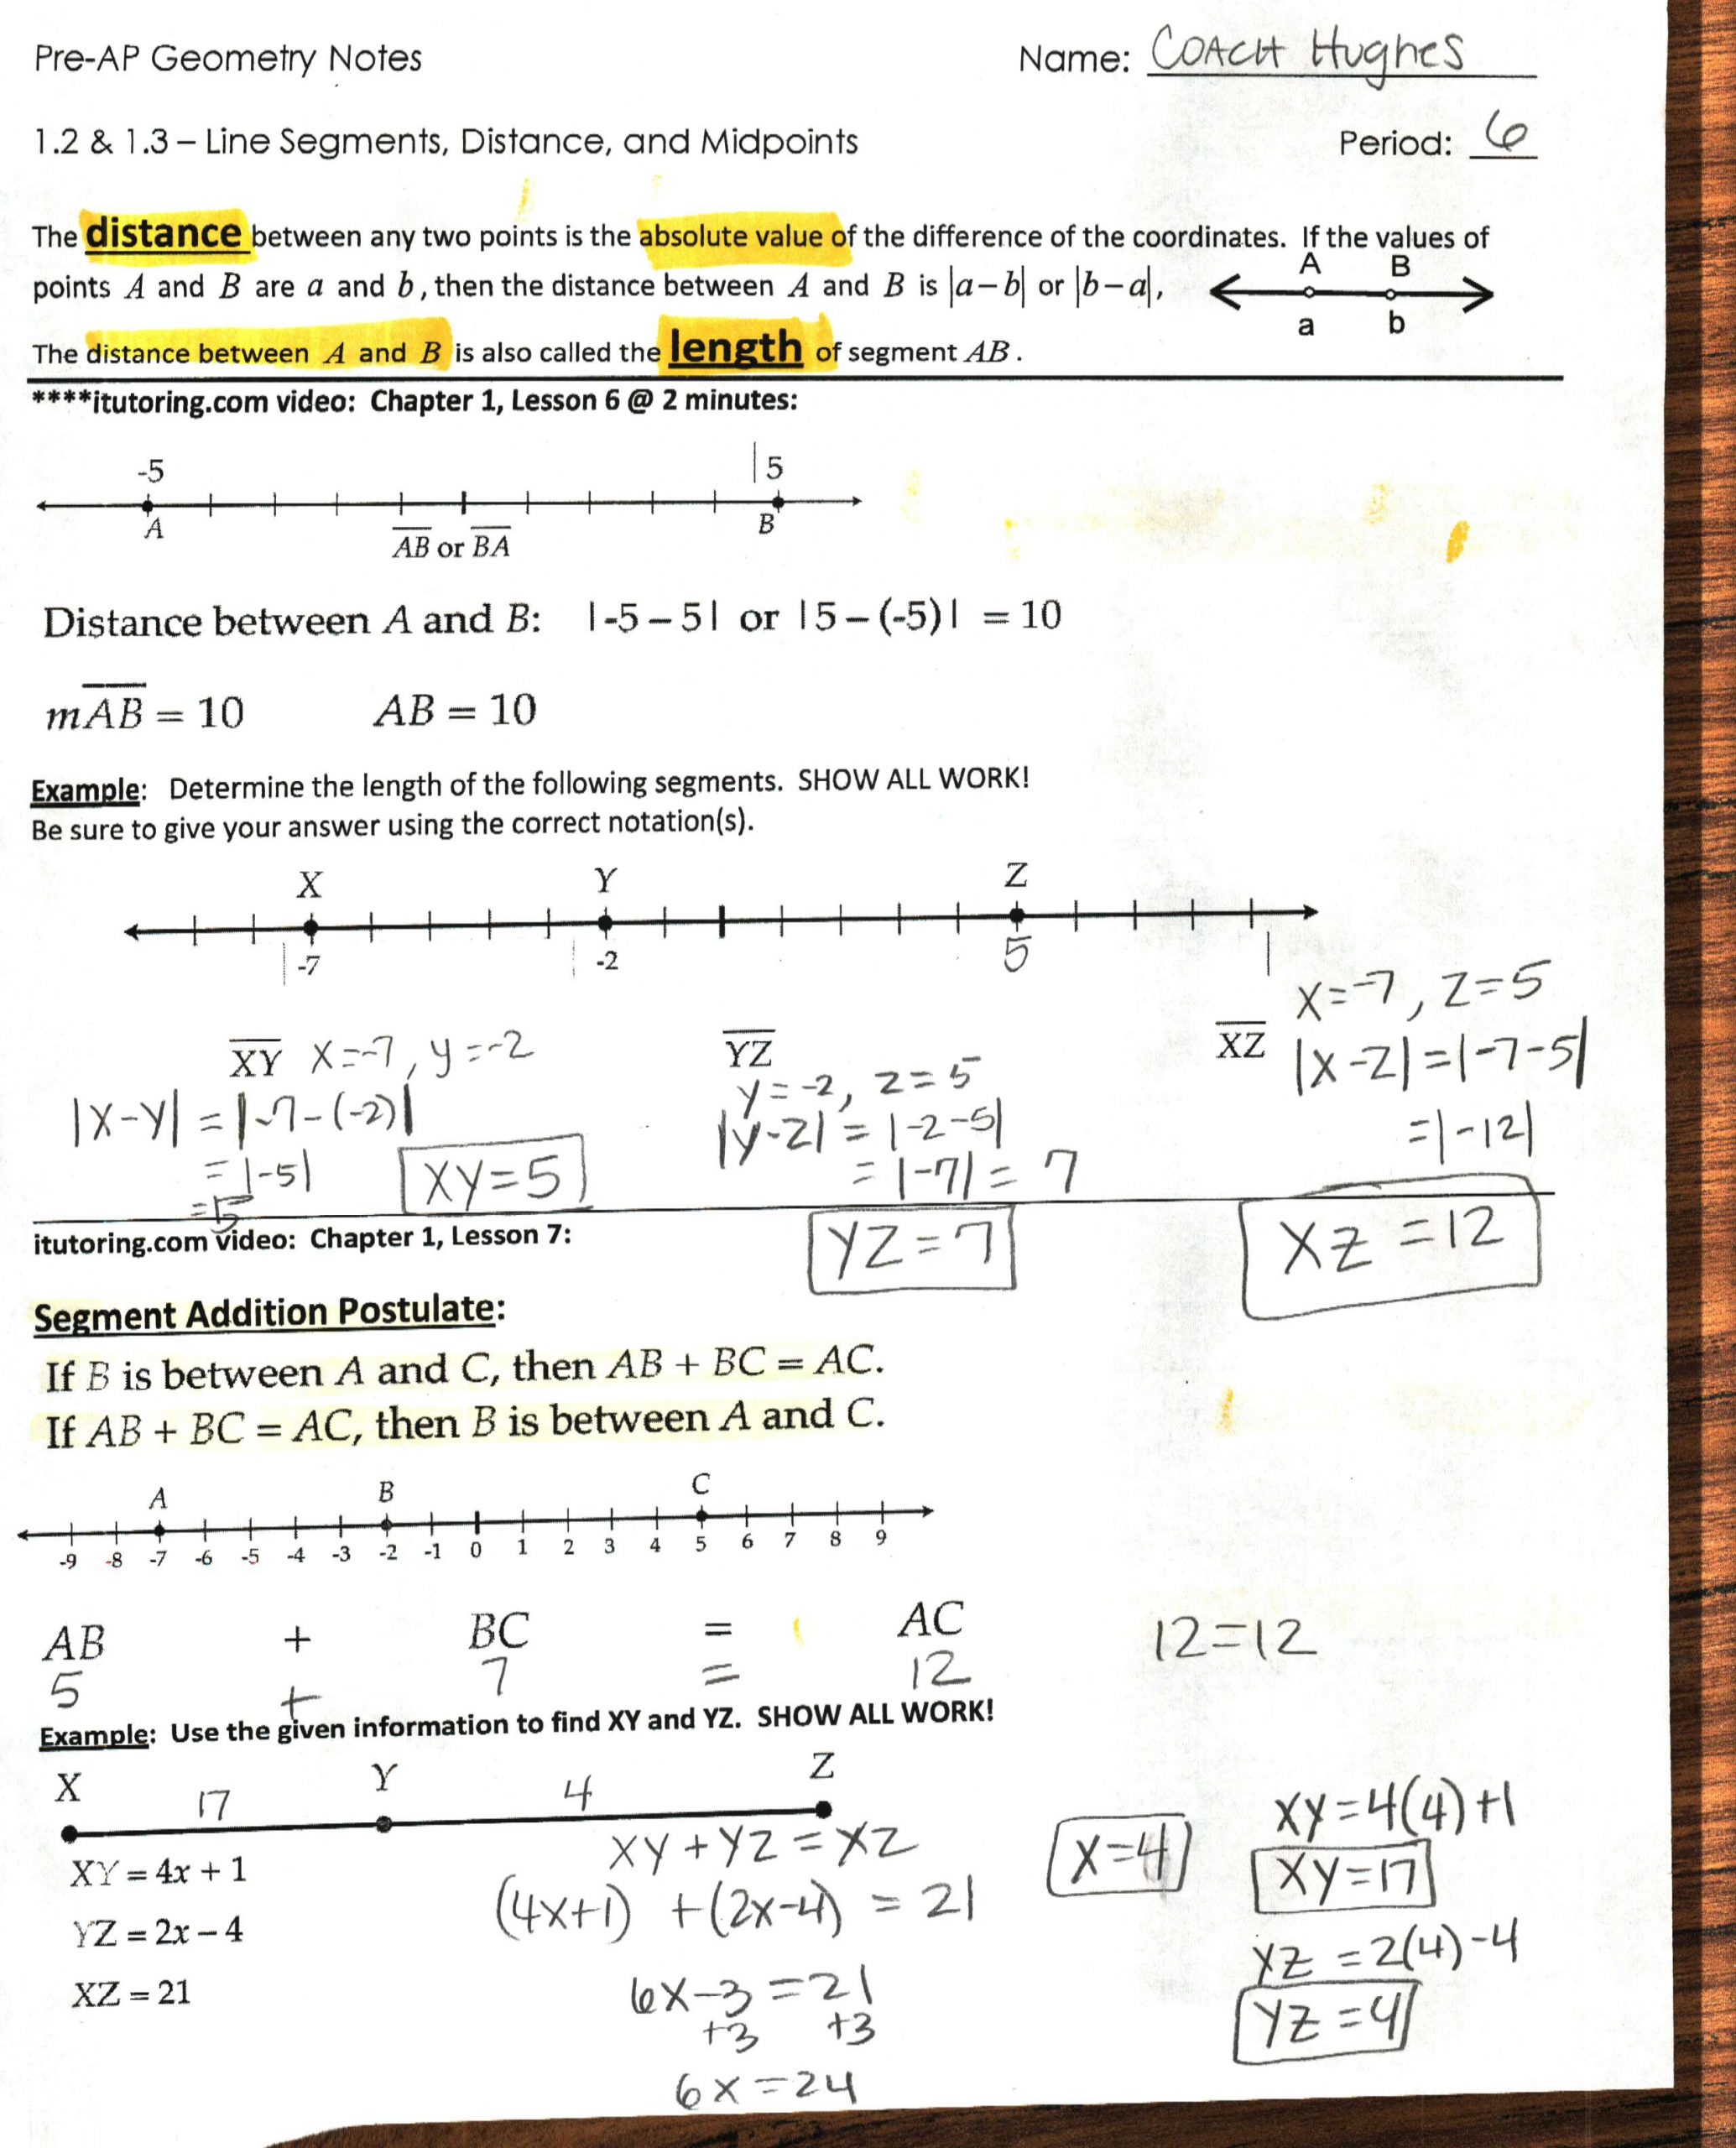 Distance and Midpoint formula Worksheet 1st Six Weeks Coach Hughes Website